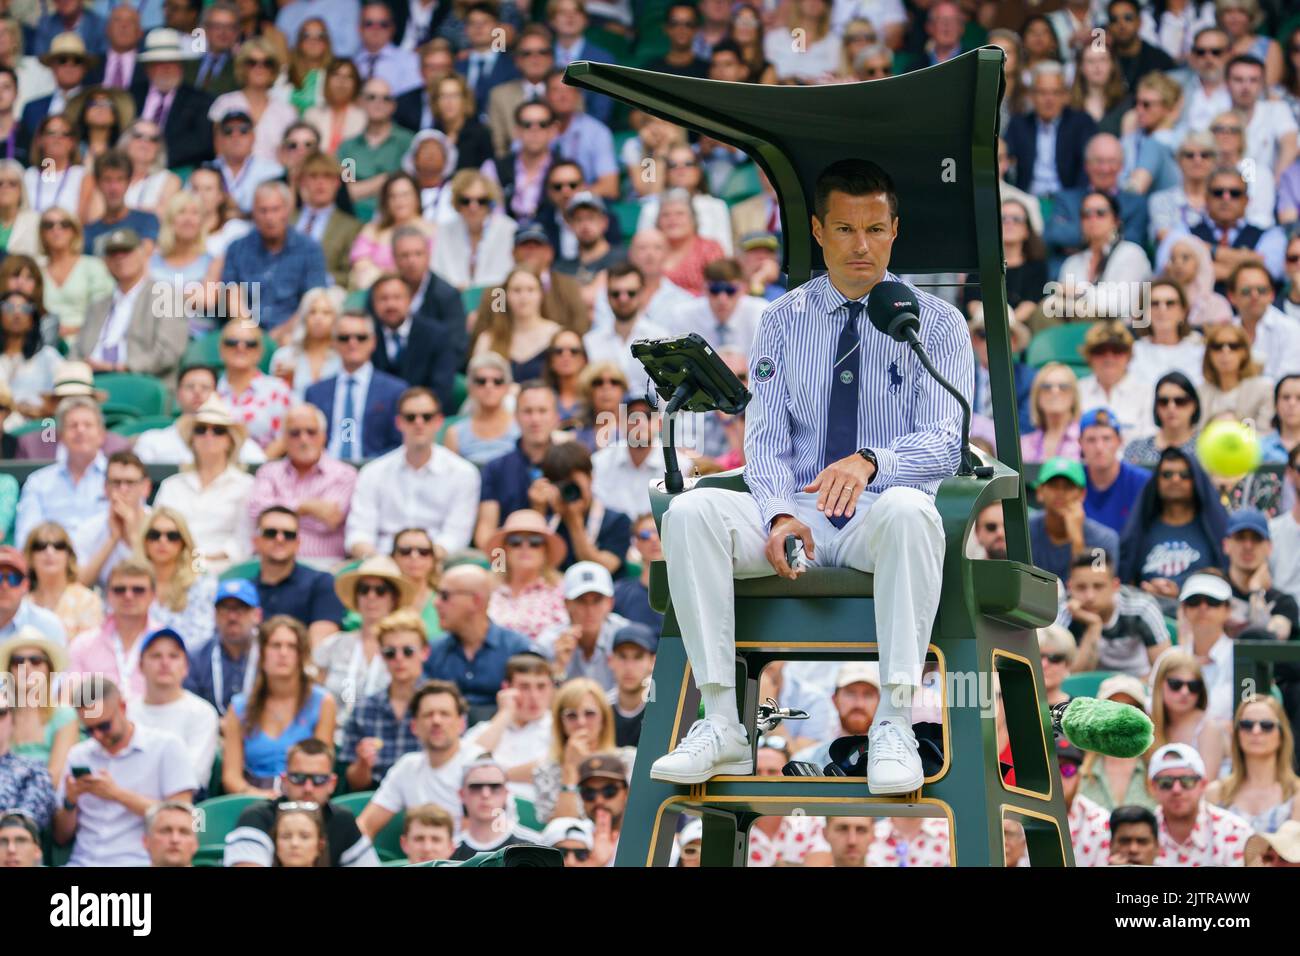 Umpire on Centre Court at The Championships 2022. Held at The All England Lawn Tennis Club, Wimbledon. Stock Photo